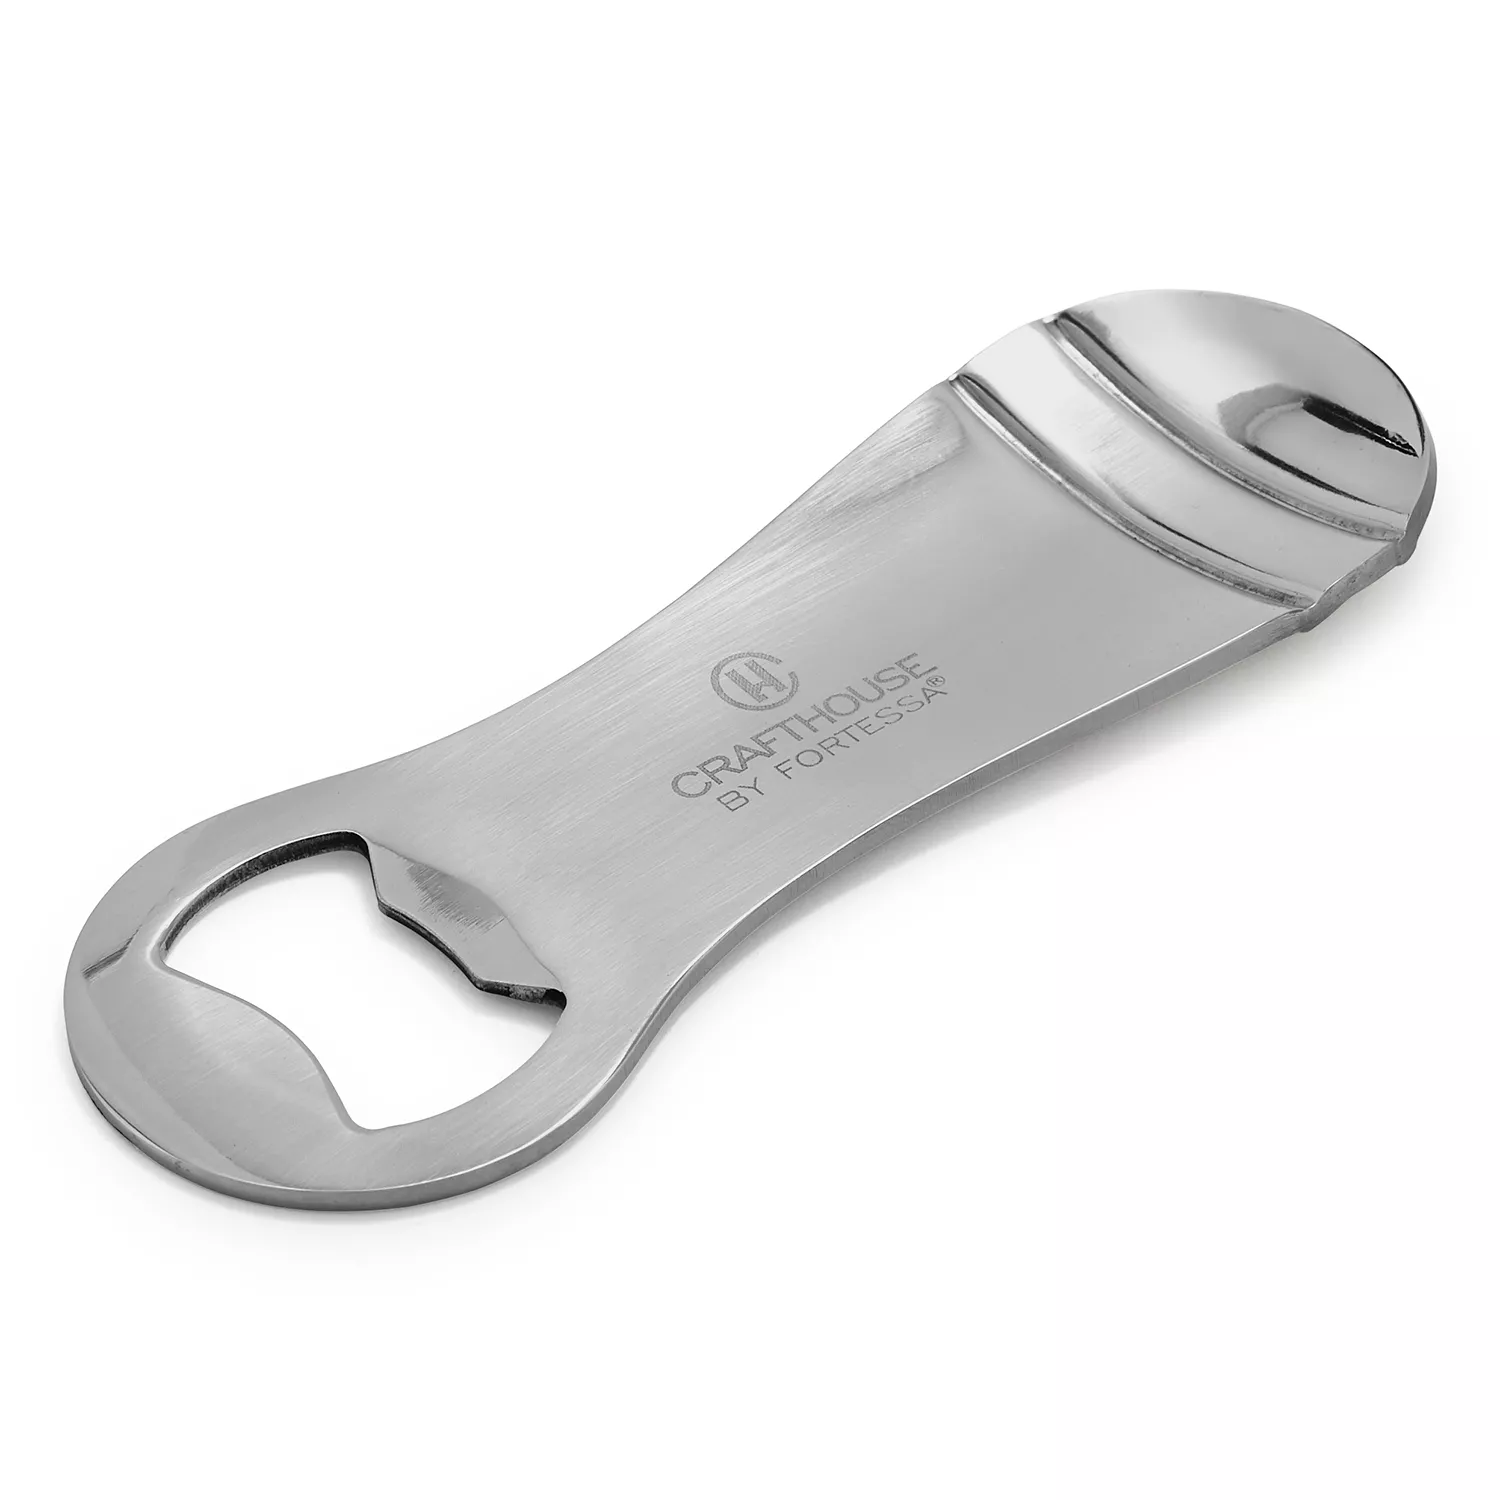 Hands On Review: OXO Cast Stainless Bottle Opener